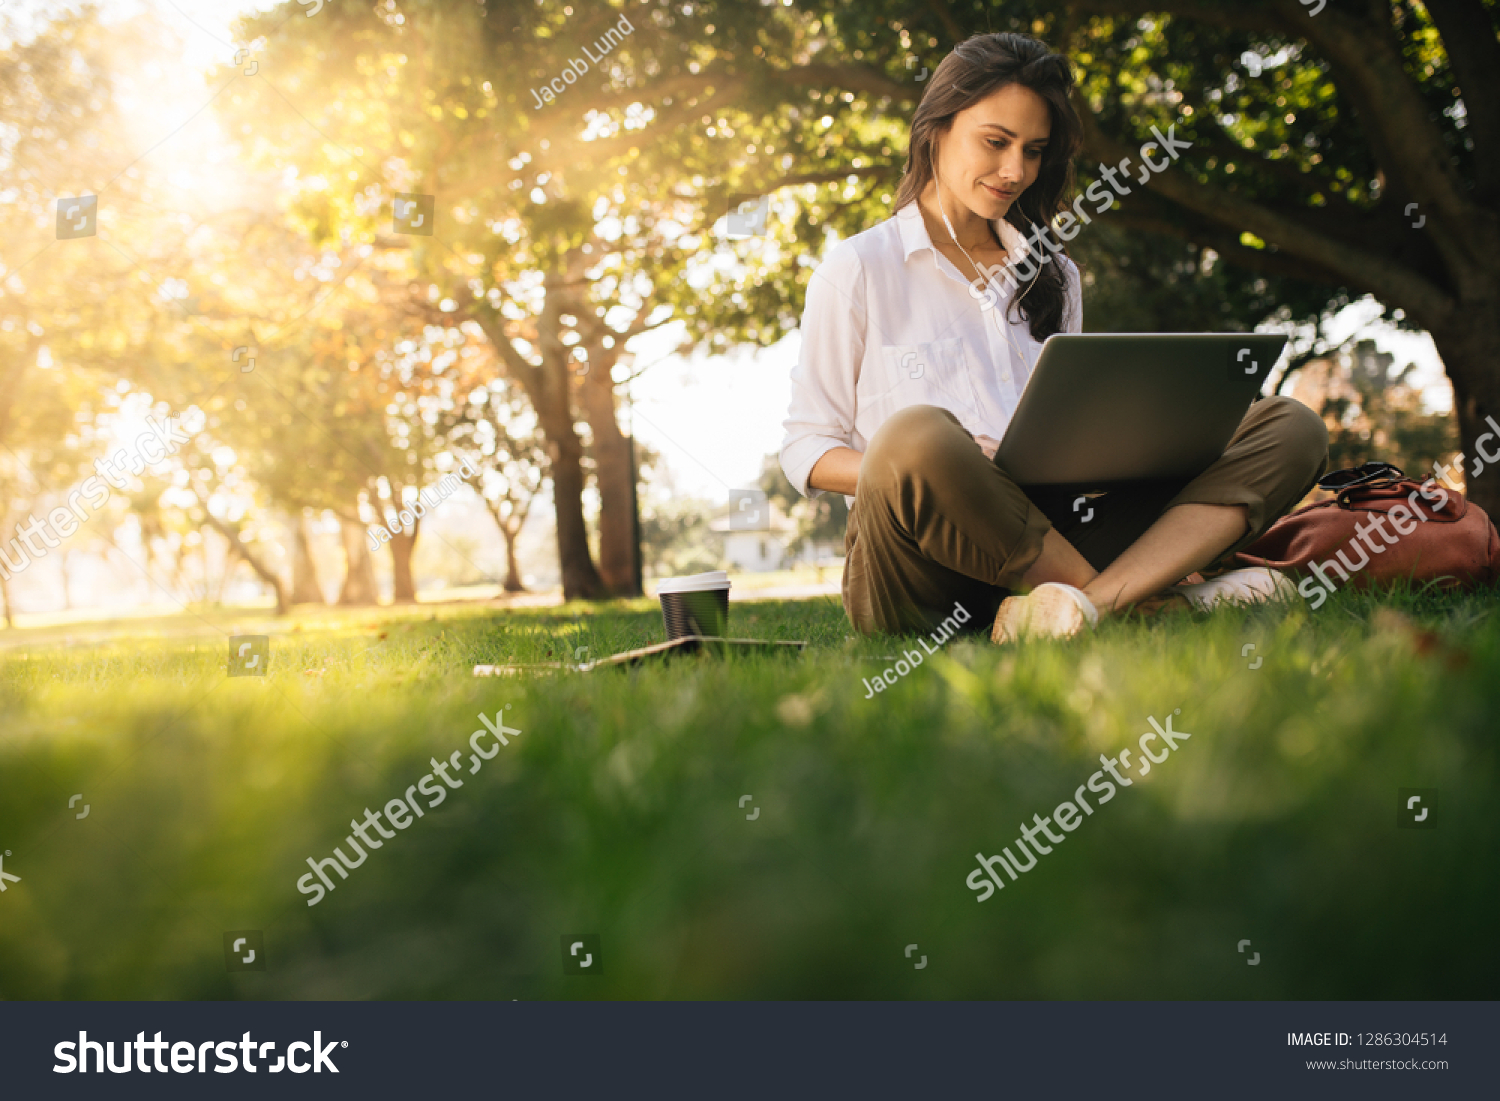 Woman sitting on grass at park working on laptop. Female wearing earphones using laptop while sitting under a tree at park with bright sunlight from behind. #1286304514